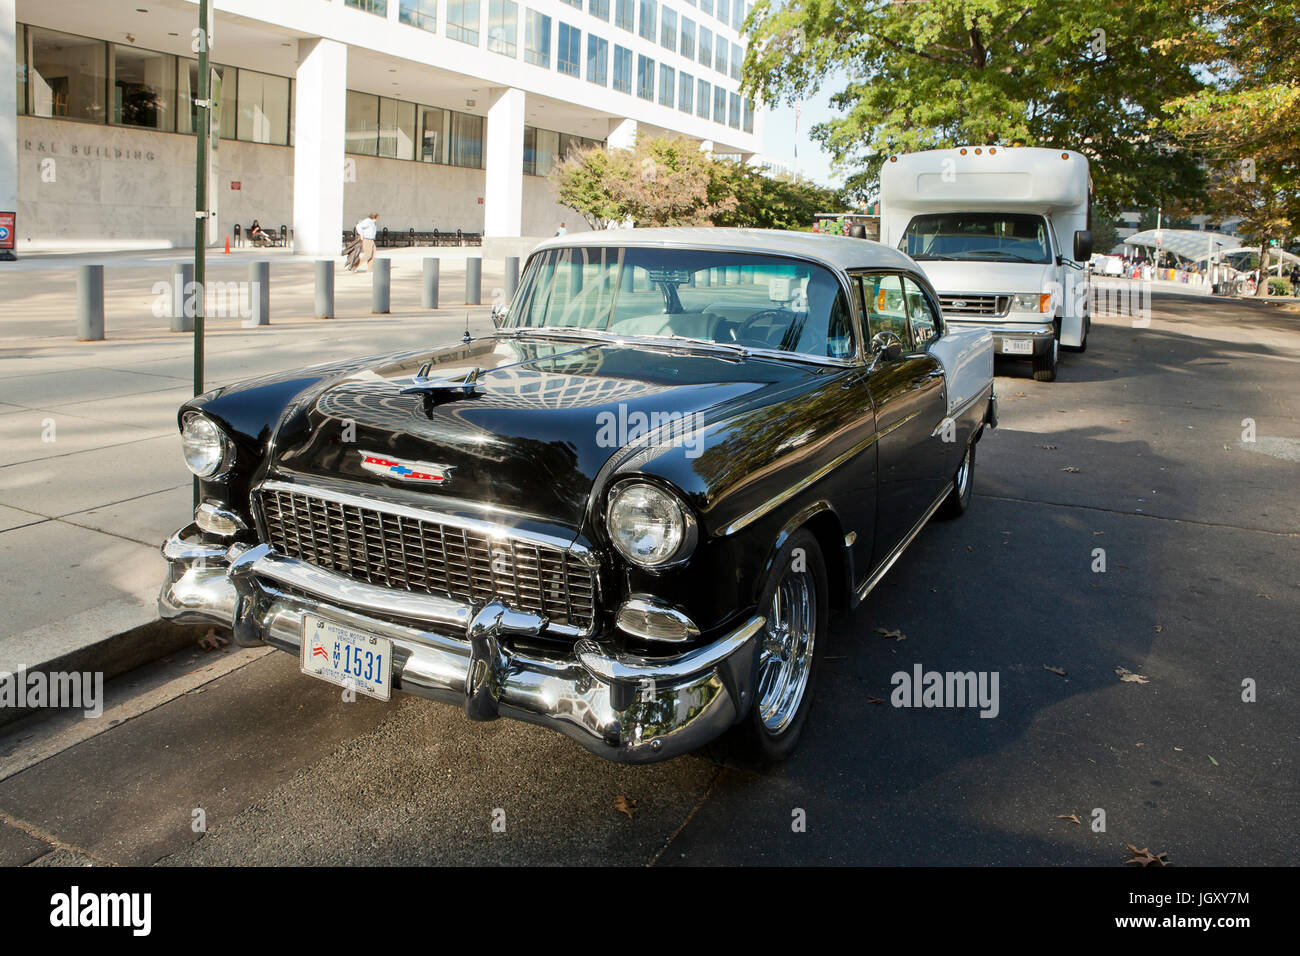 1955 Chevy Bel Air classic car - USA Stock Photo